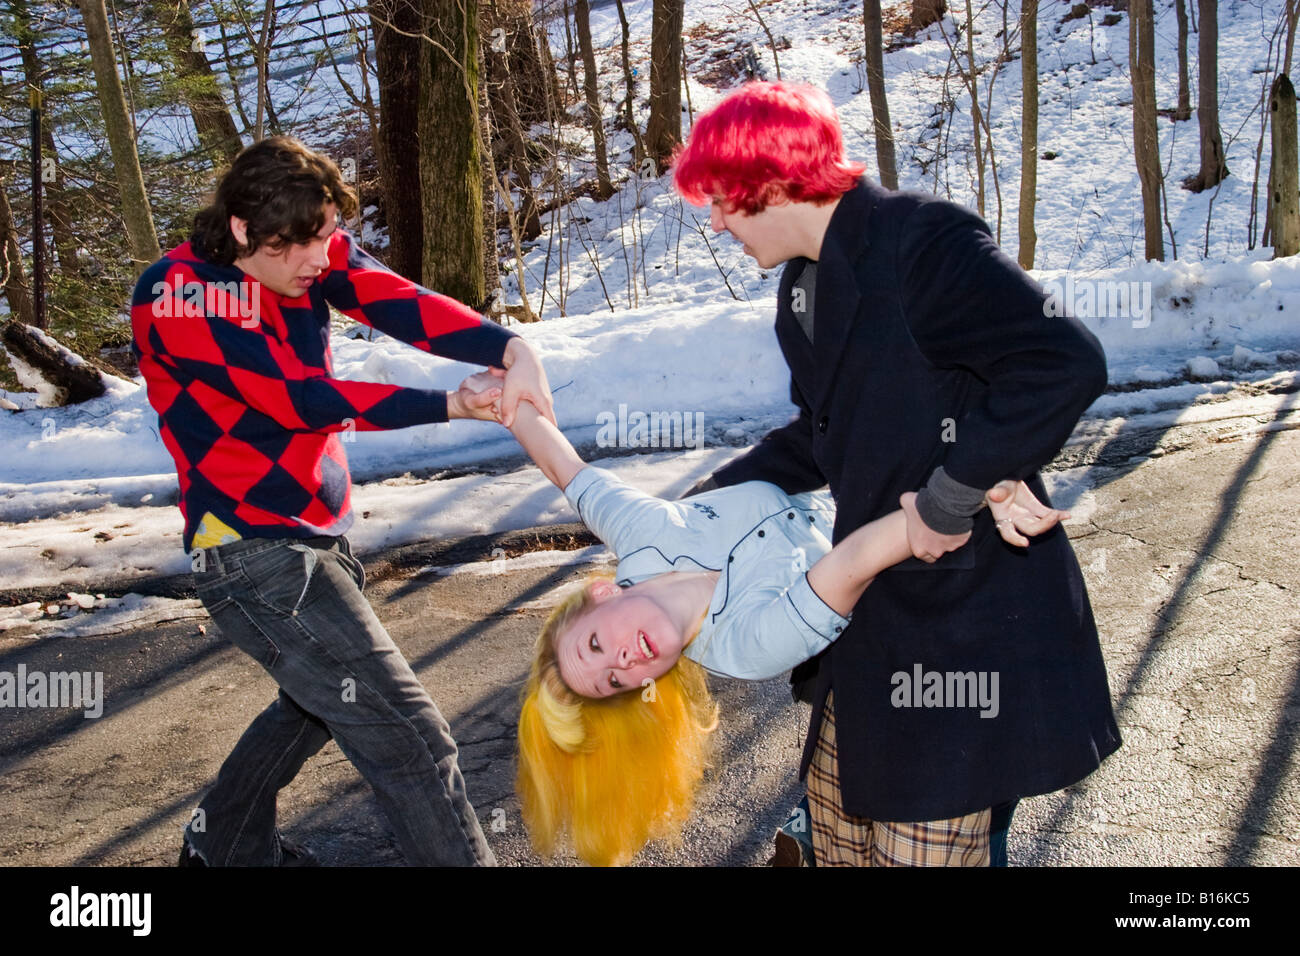 Teen boys one with dyed red hair joking around outside with a blond teen girl Model Released Stock Photo